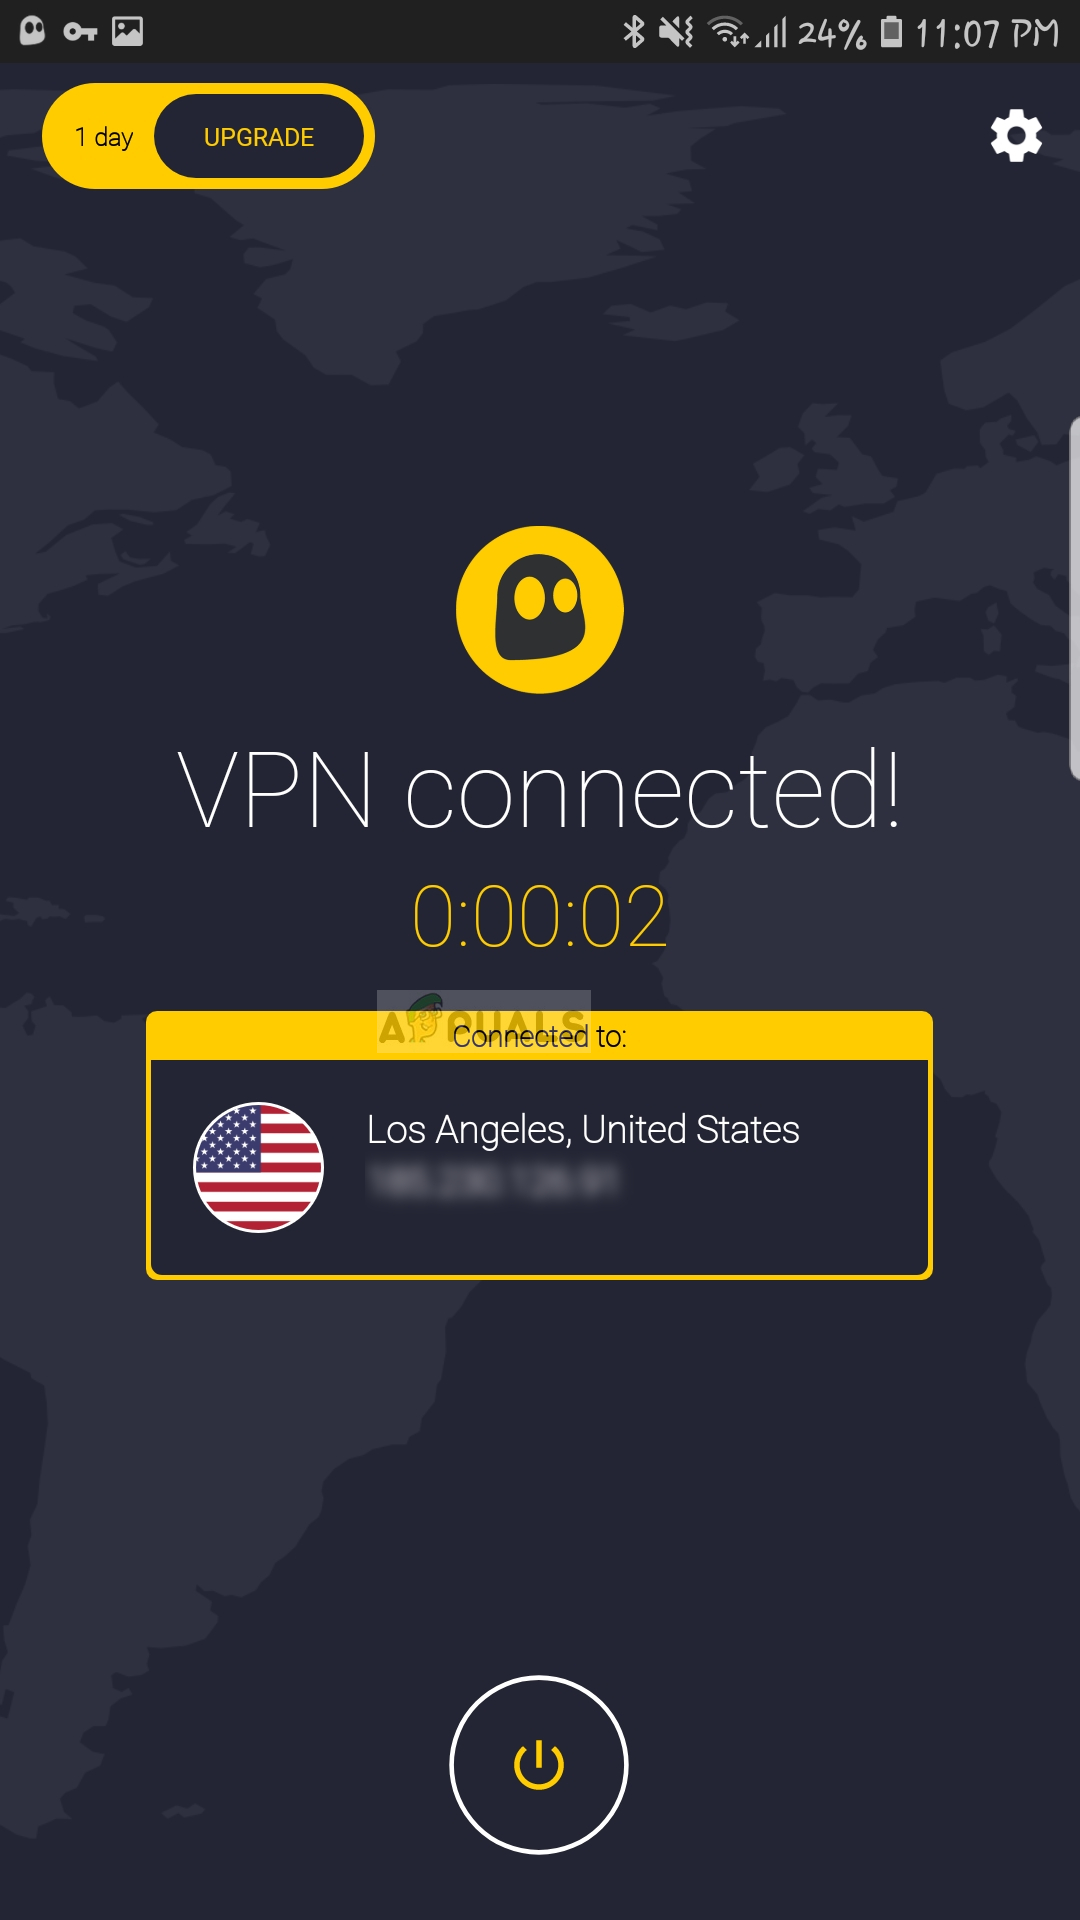 VPN connected - CyberGhost